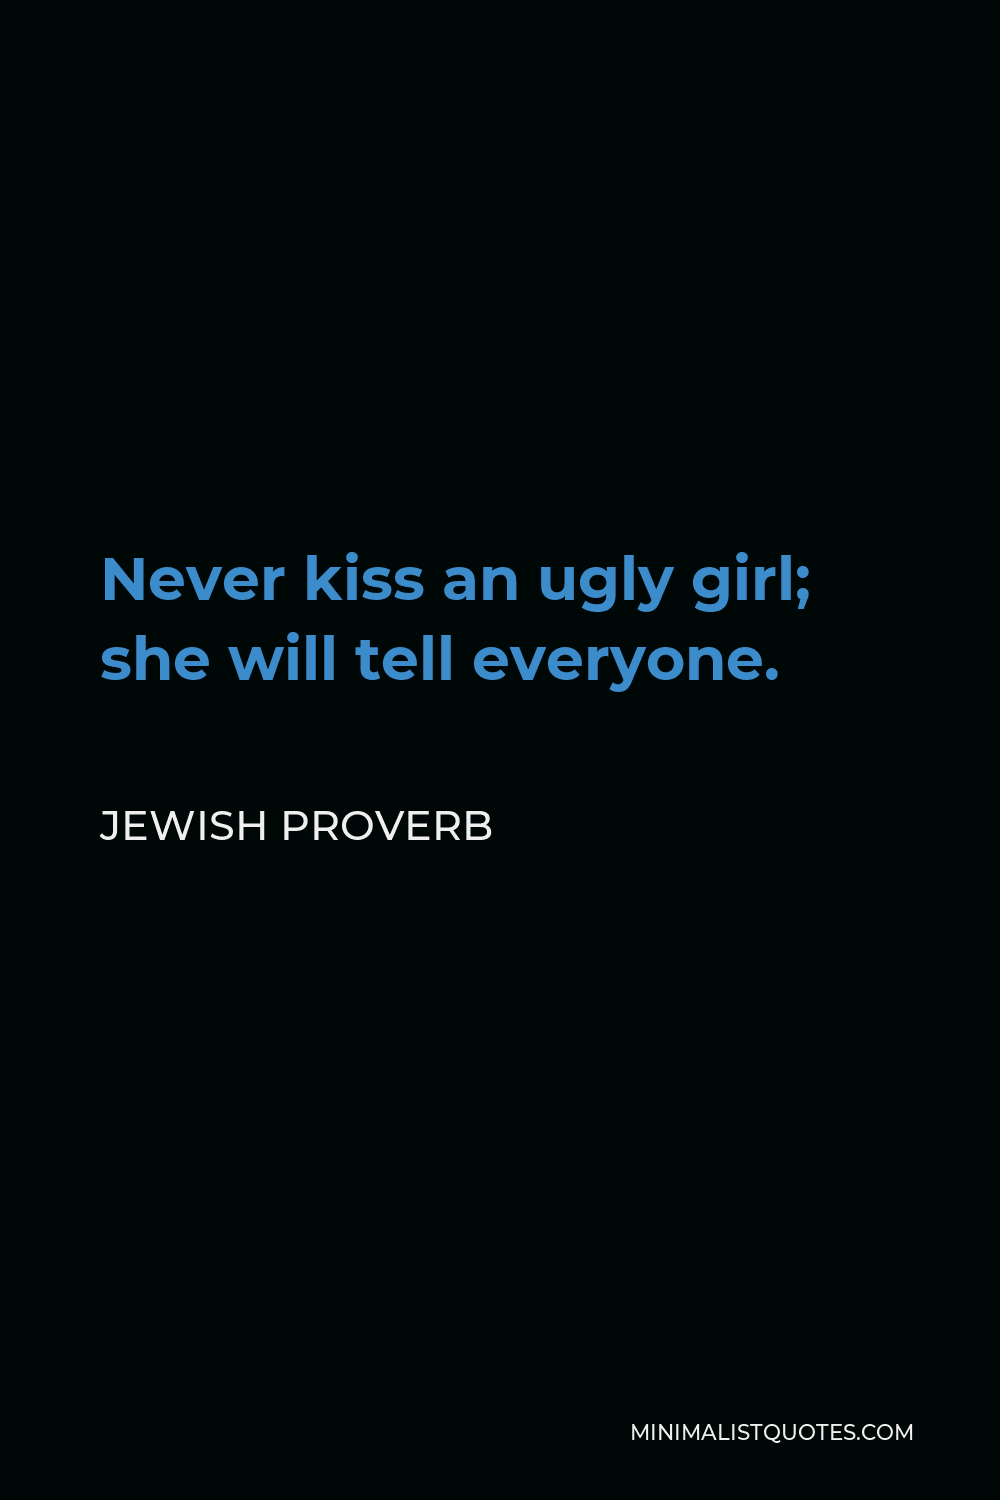 Jewish Proverb Quote - Never kiss an ugly girl; she will tell everyone.